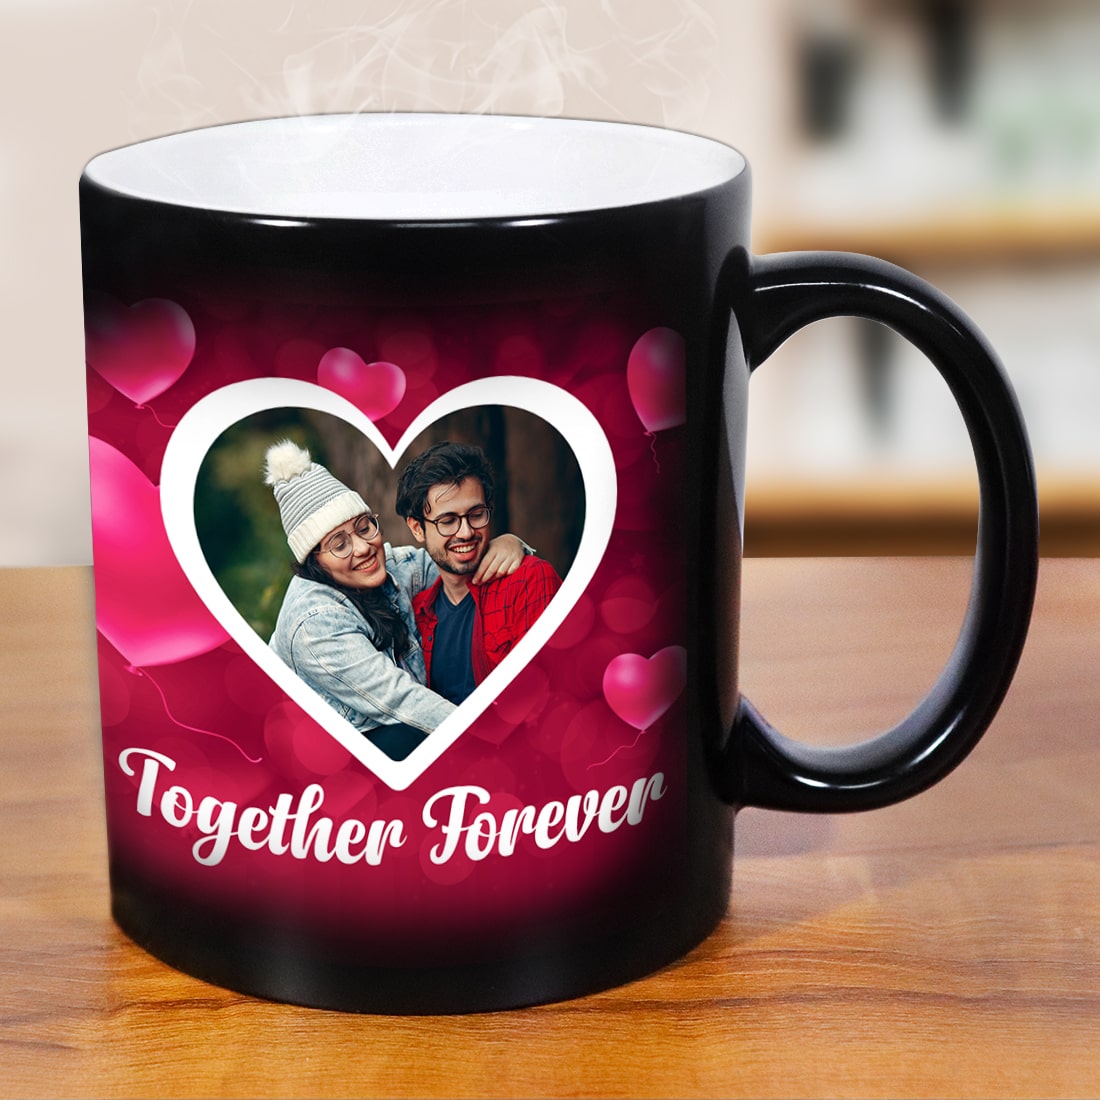 https://www.huppme.com/wp-content/uploads/2022/02/S04D16017-Together-Forever-Personalized-Magic-Mug..jpg